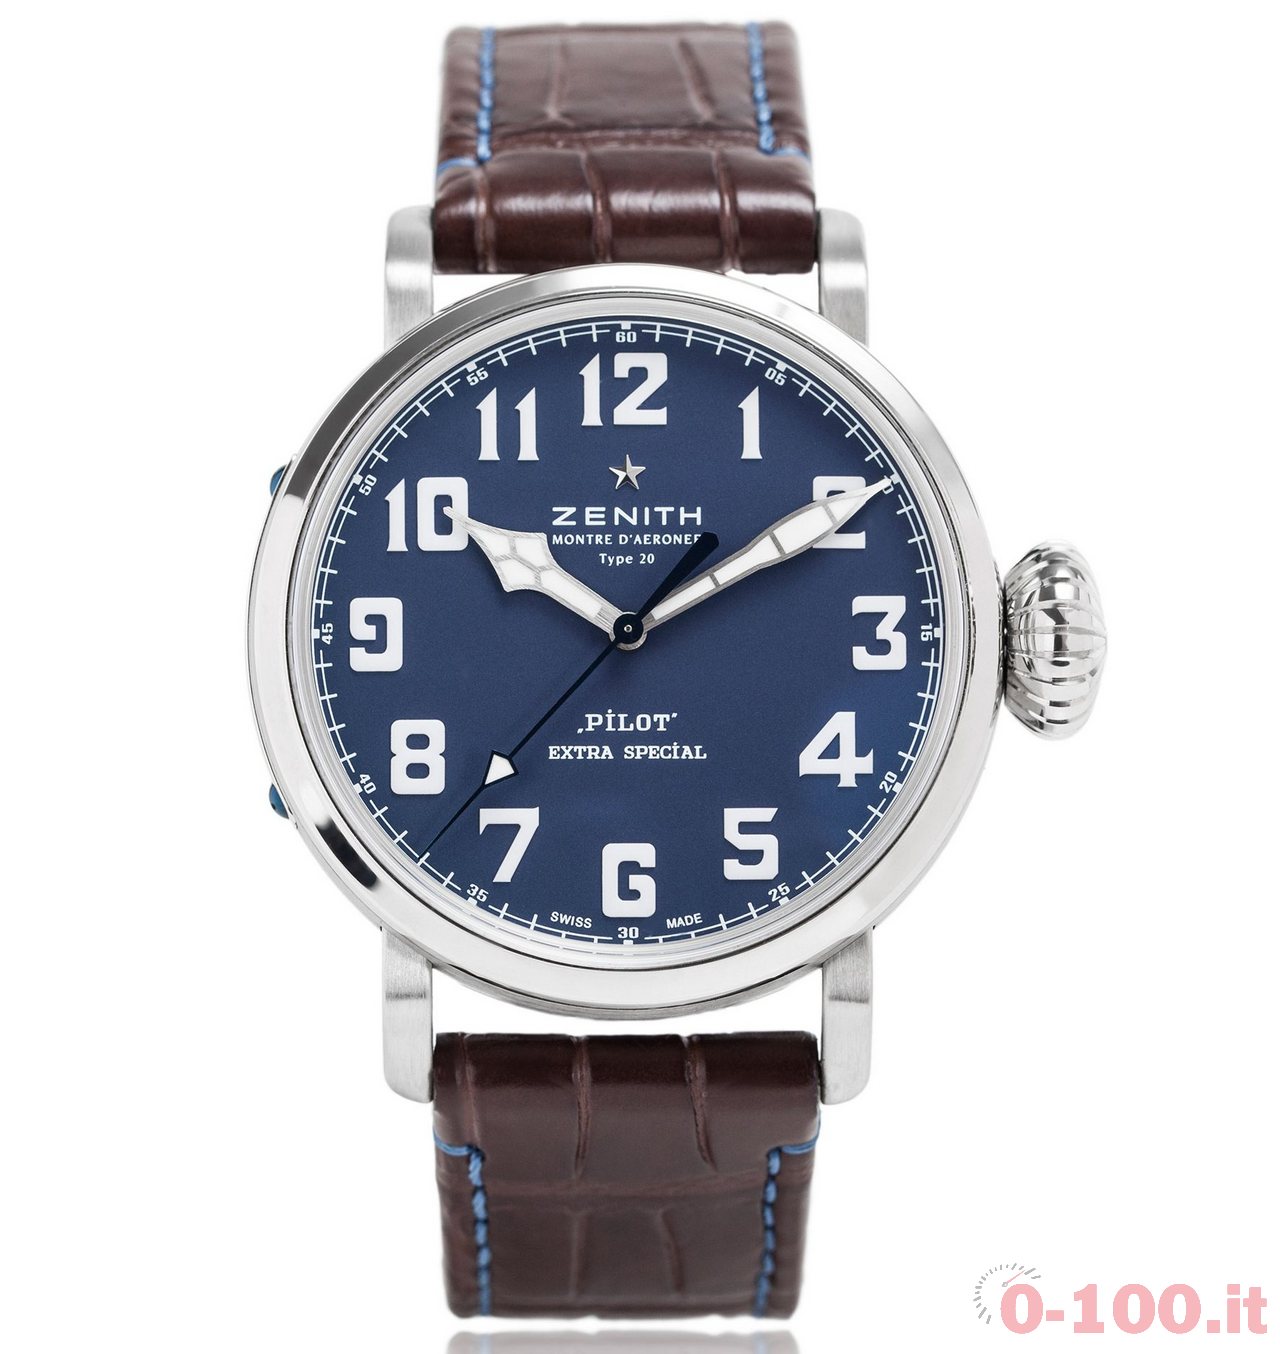 zenith-pilot-type-20-extra-special-blue-limited-edition-the-watch-gallery-prezzo-price_0-1006